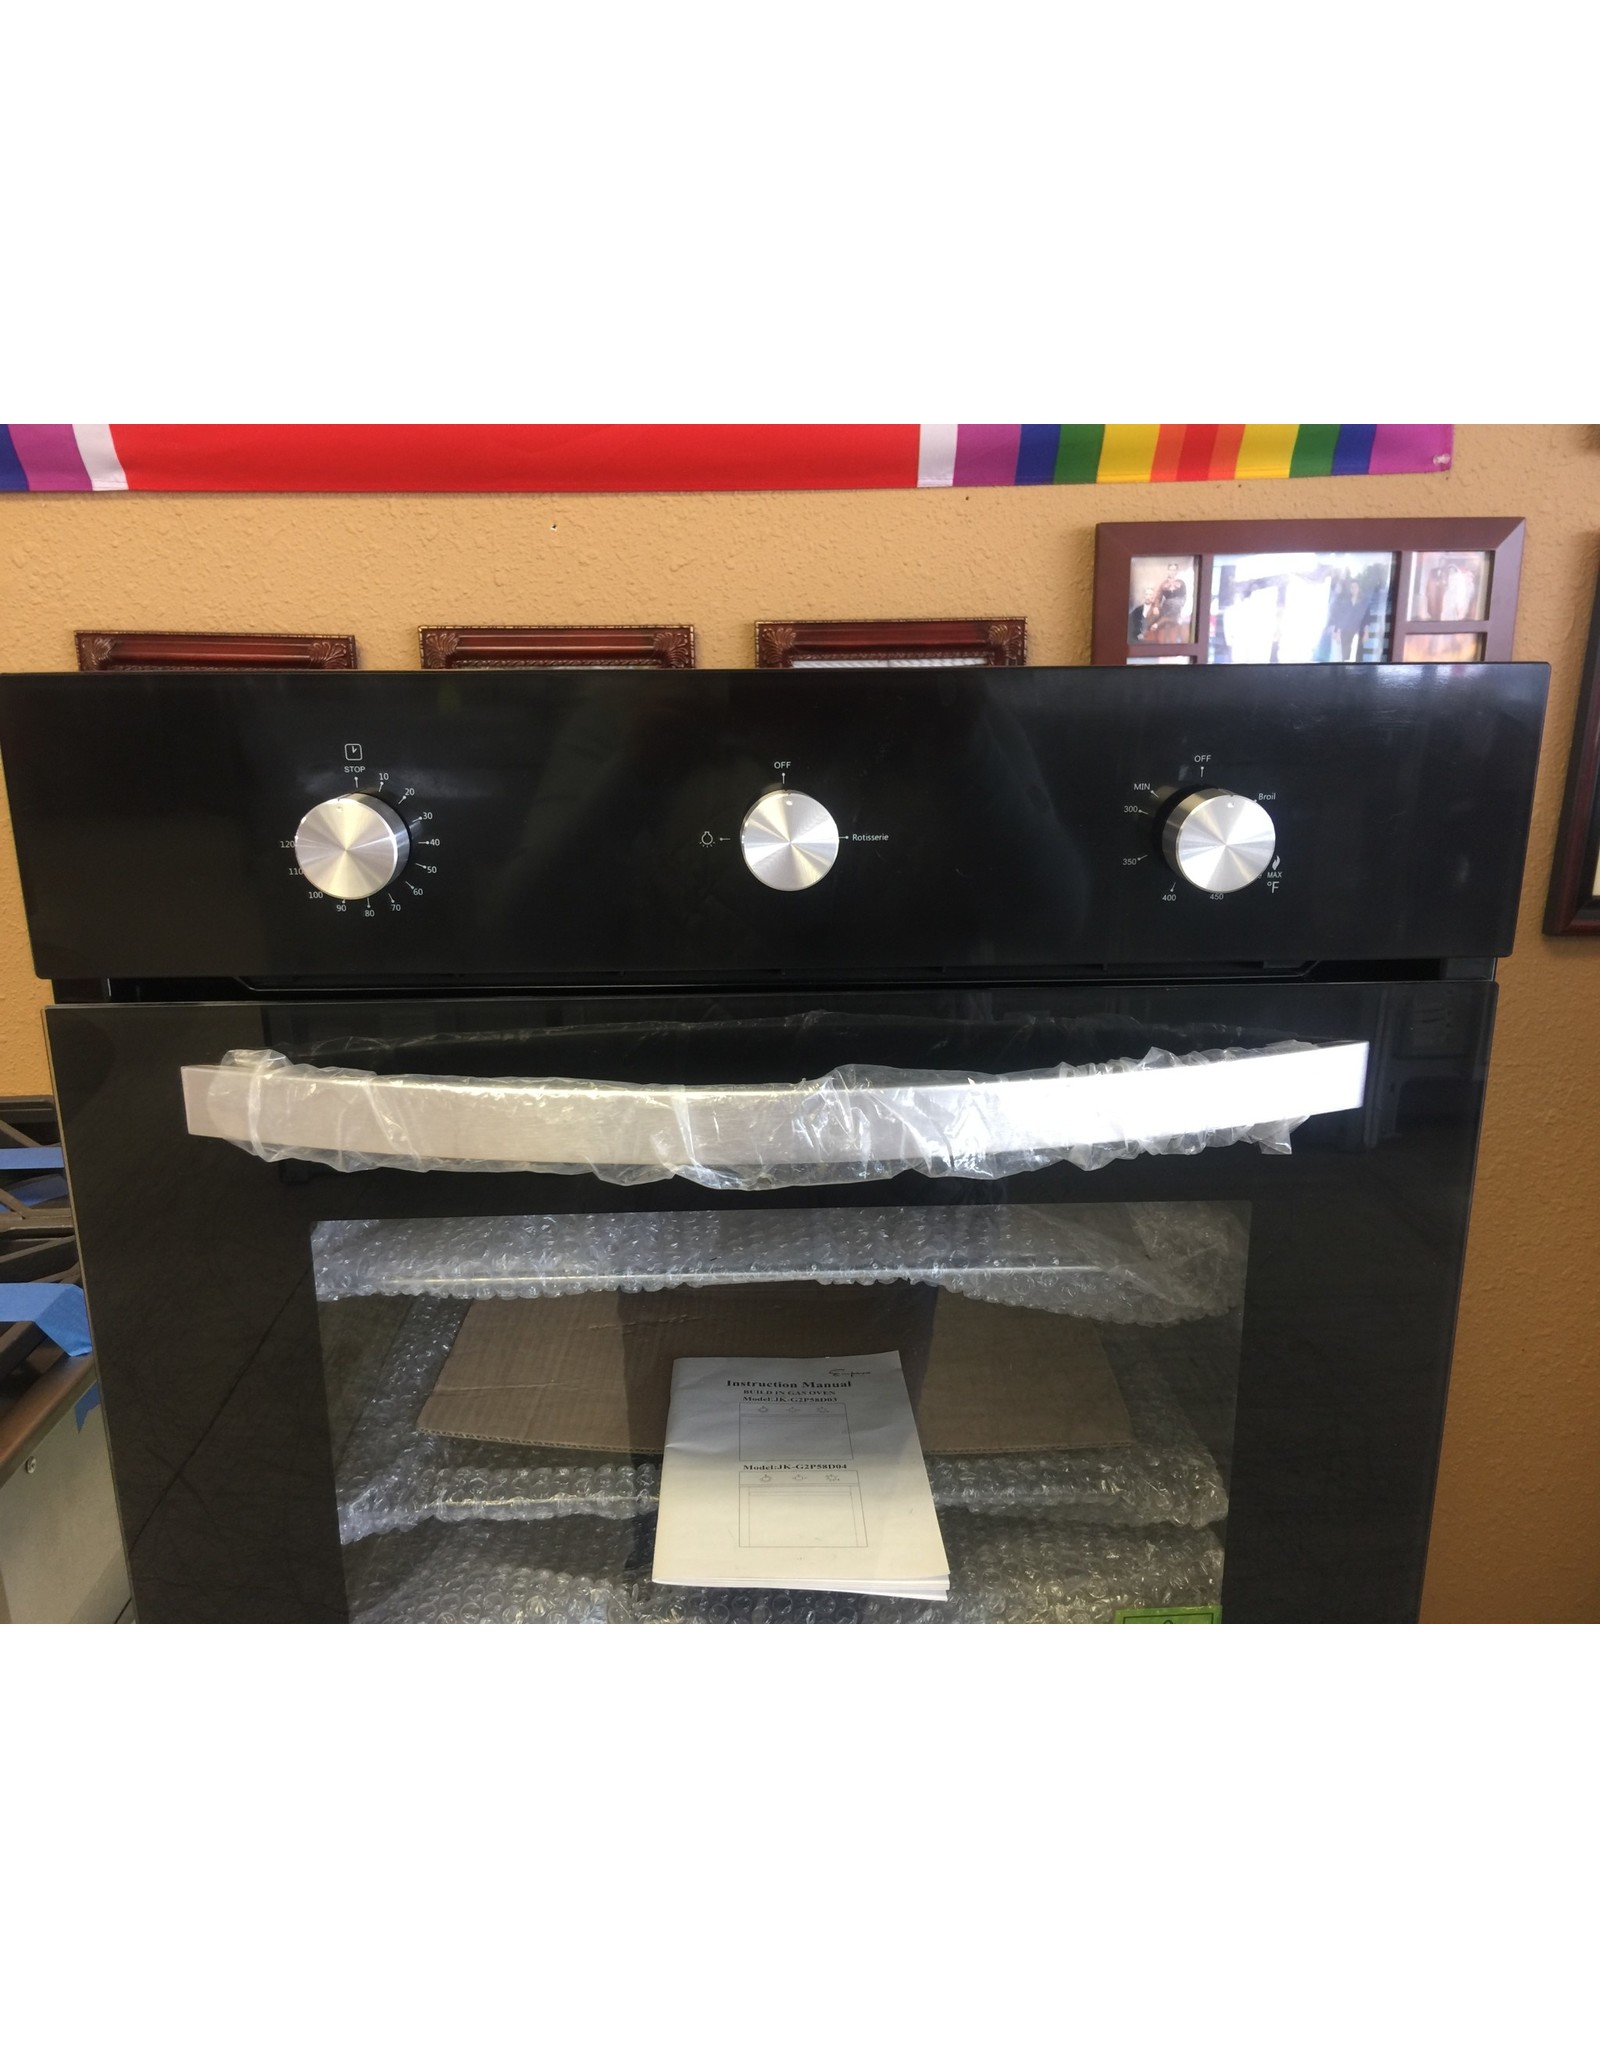 NEW!!! GAS SINGLE WALL OVEN UNIT